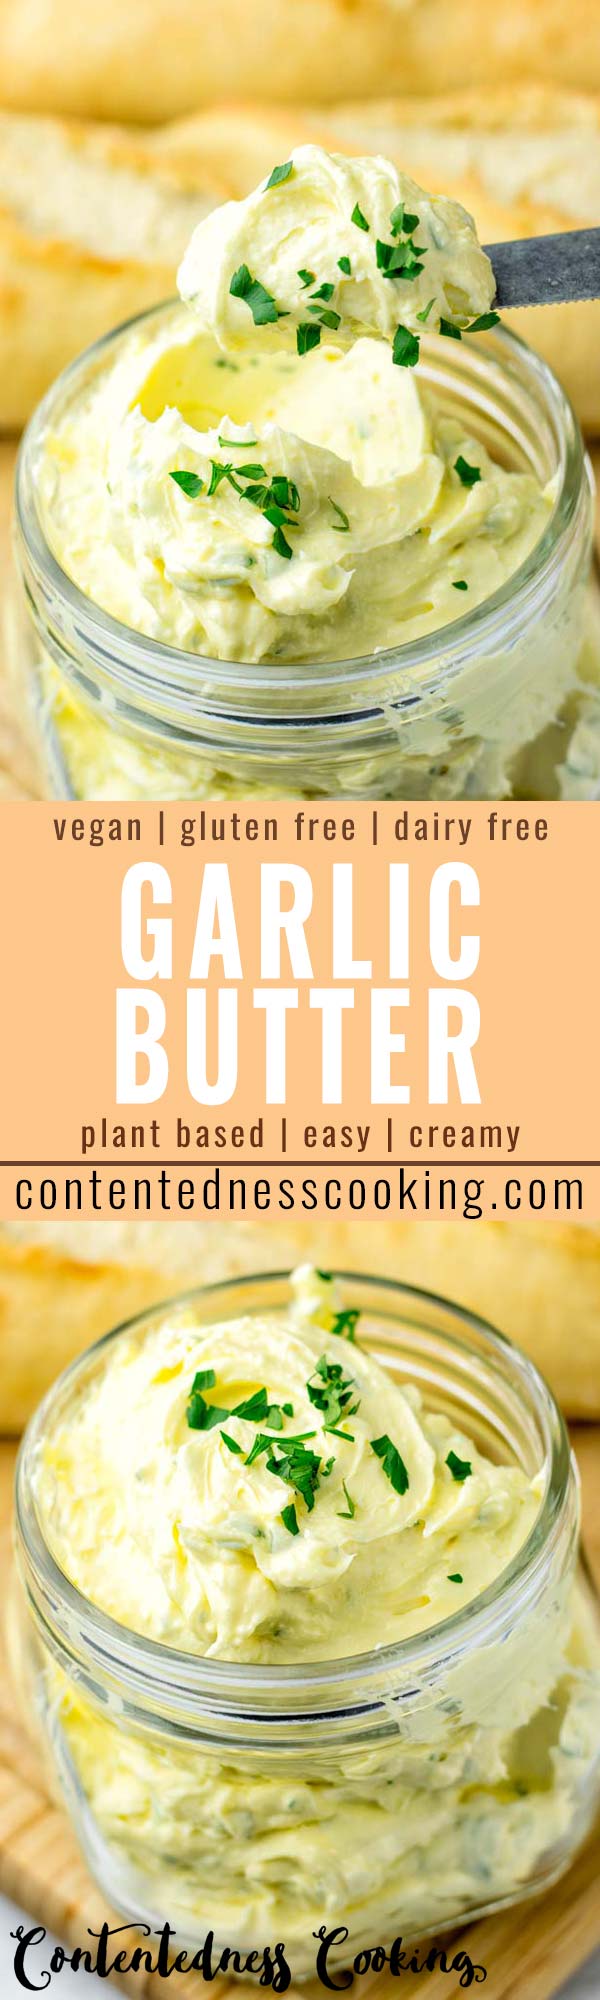 This Garlic Butter will be an instant hit at your house. No one would ever guess it is vegan and dairy free. It is delicious on bread, pasta, stir fry vegetables and more. Amazing for dinner, lunch, meal prep and even breakfast plus parties that the whole family will love. #vegan #dairyfree #glutenfree #garlicbutter #veganbutter #mealprep #dinner #lunch #budgetmeals #contentednesscooking #partyfood #bbqideas 